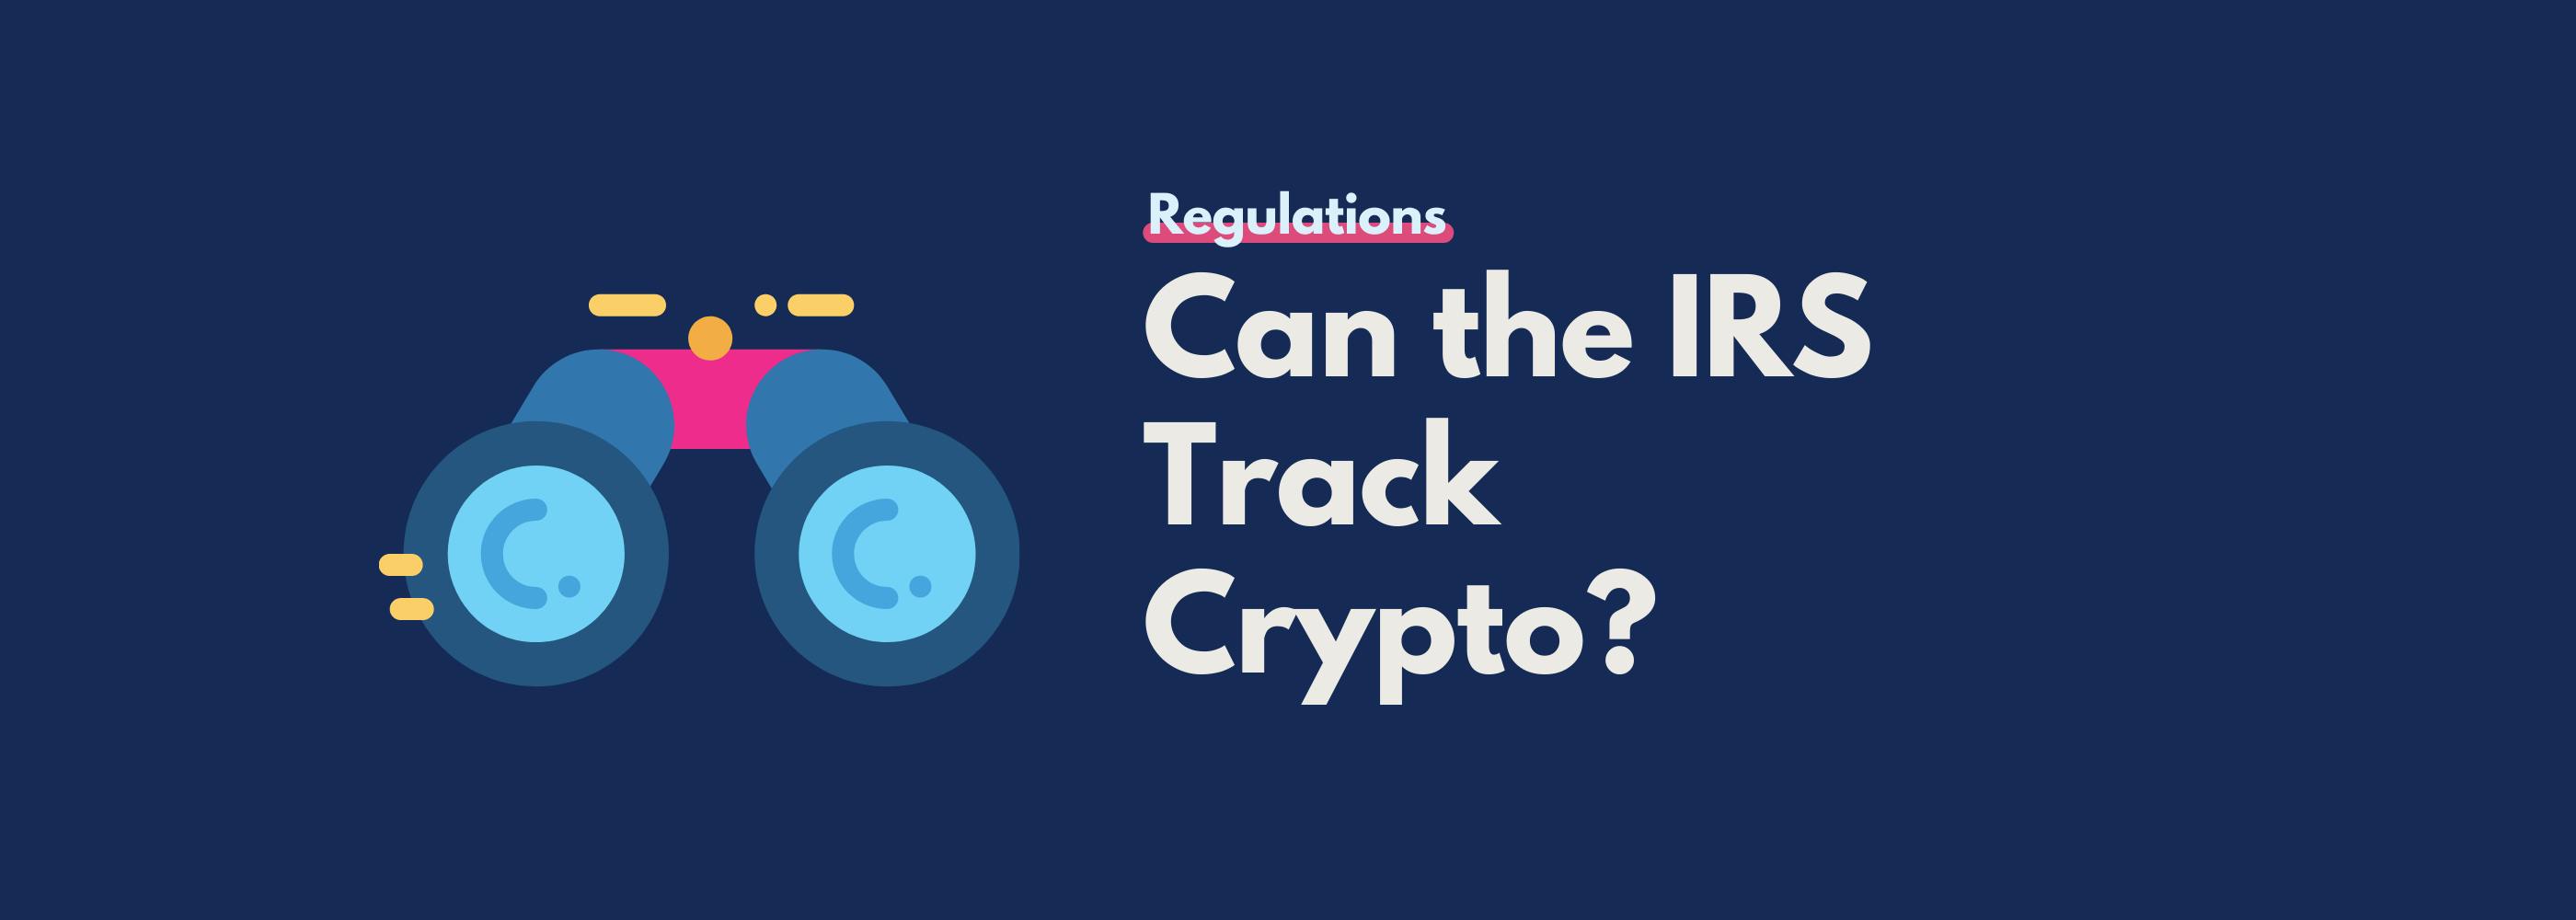 Can the IRS track crypto?